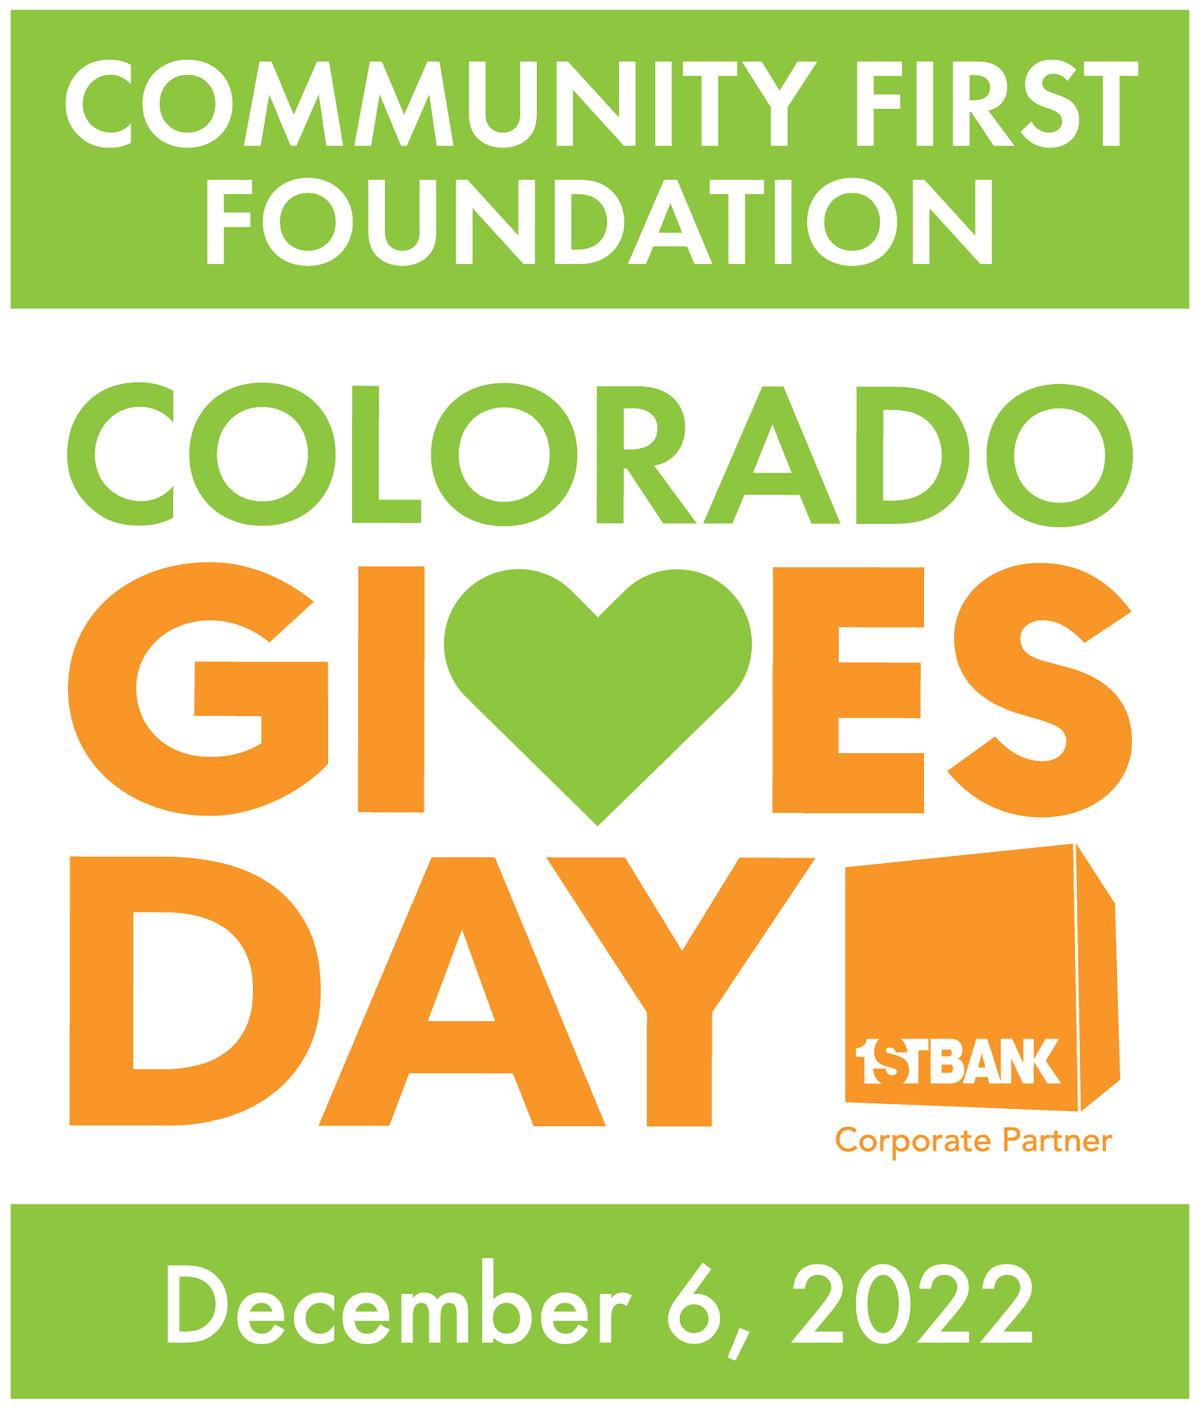 Donate to support CFPD during the holidays!